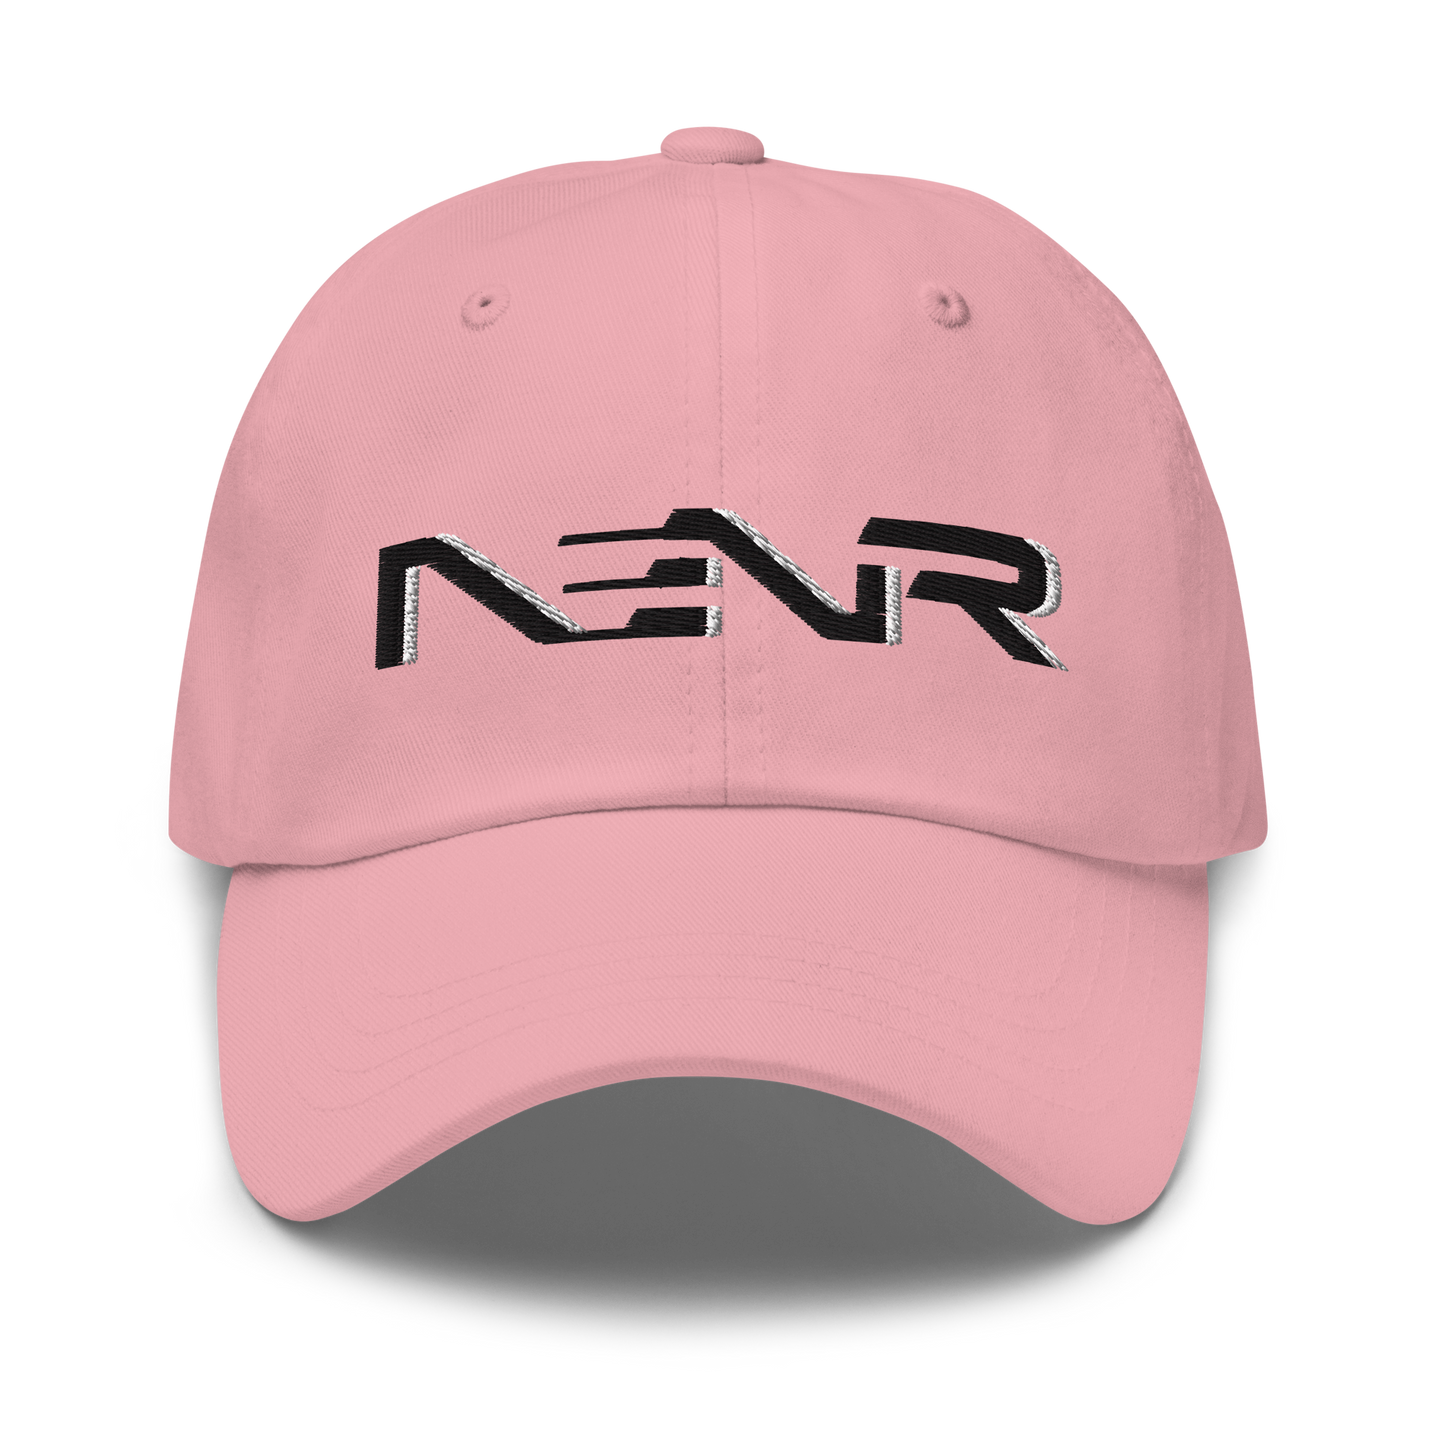 EMBROIDERED NENR CLASSIC